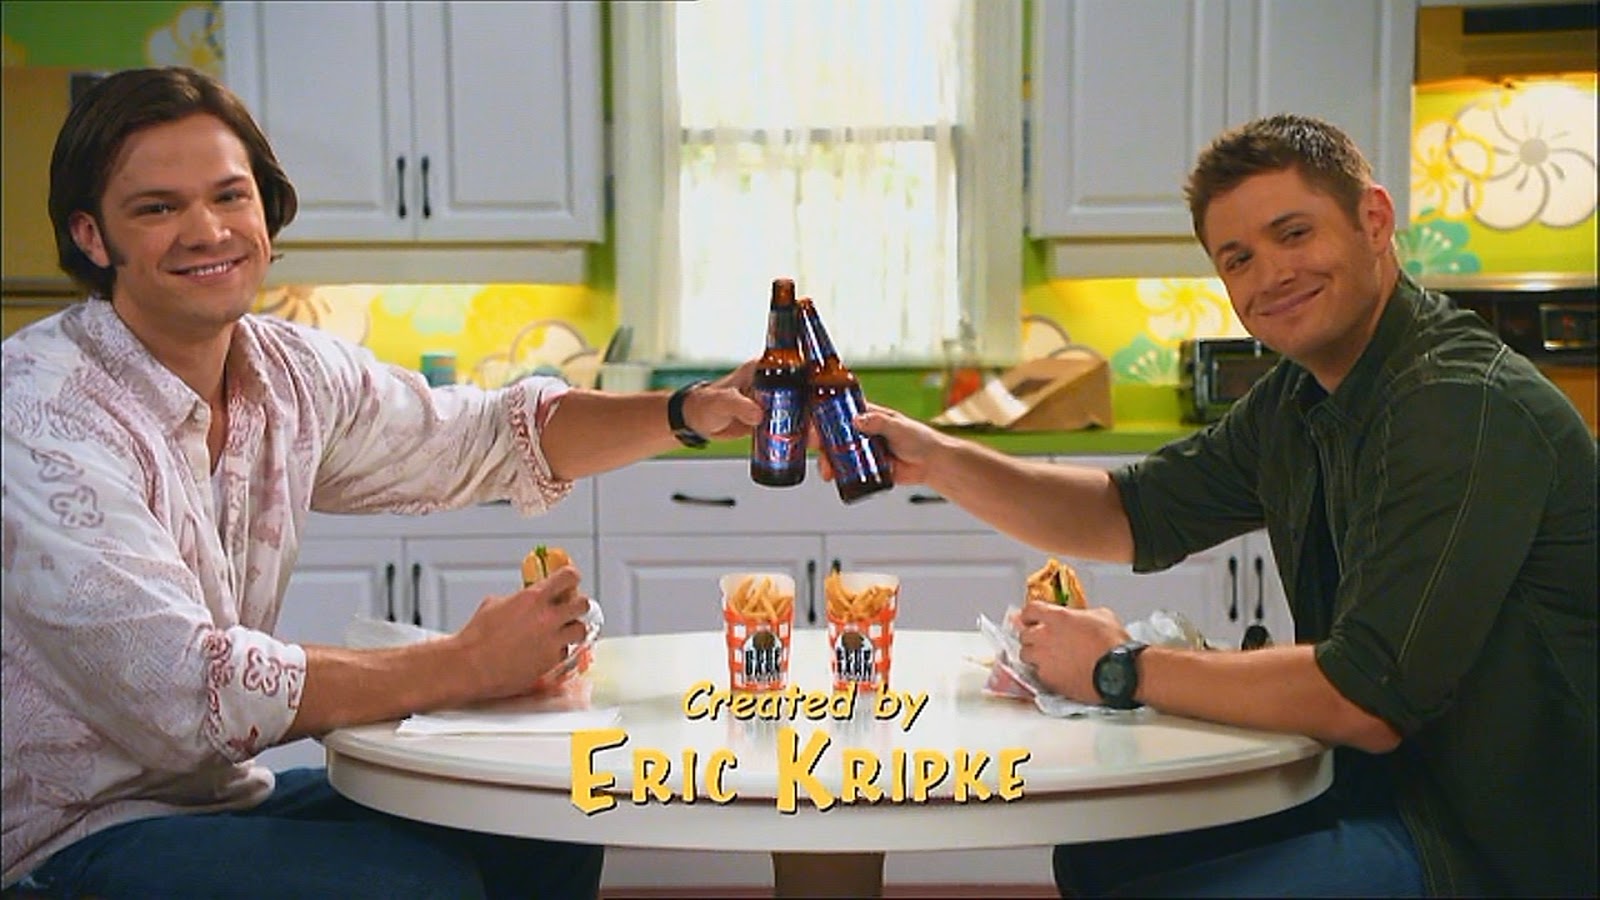 Sam and Dean toasting with a beer as their sitcom song ends at the beginning of the episode.